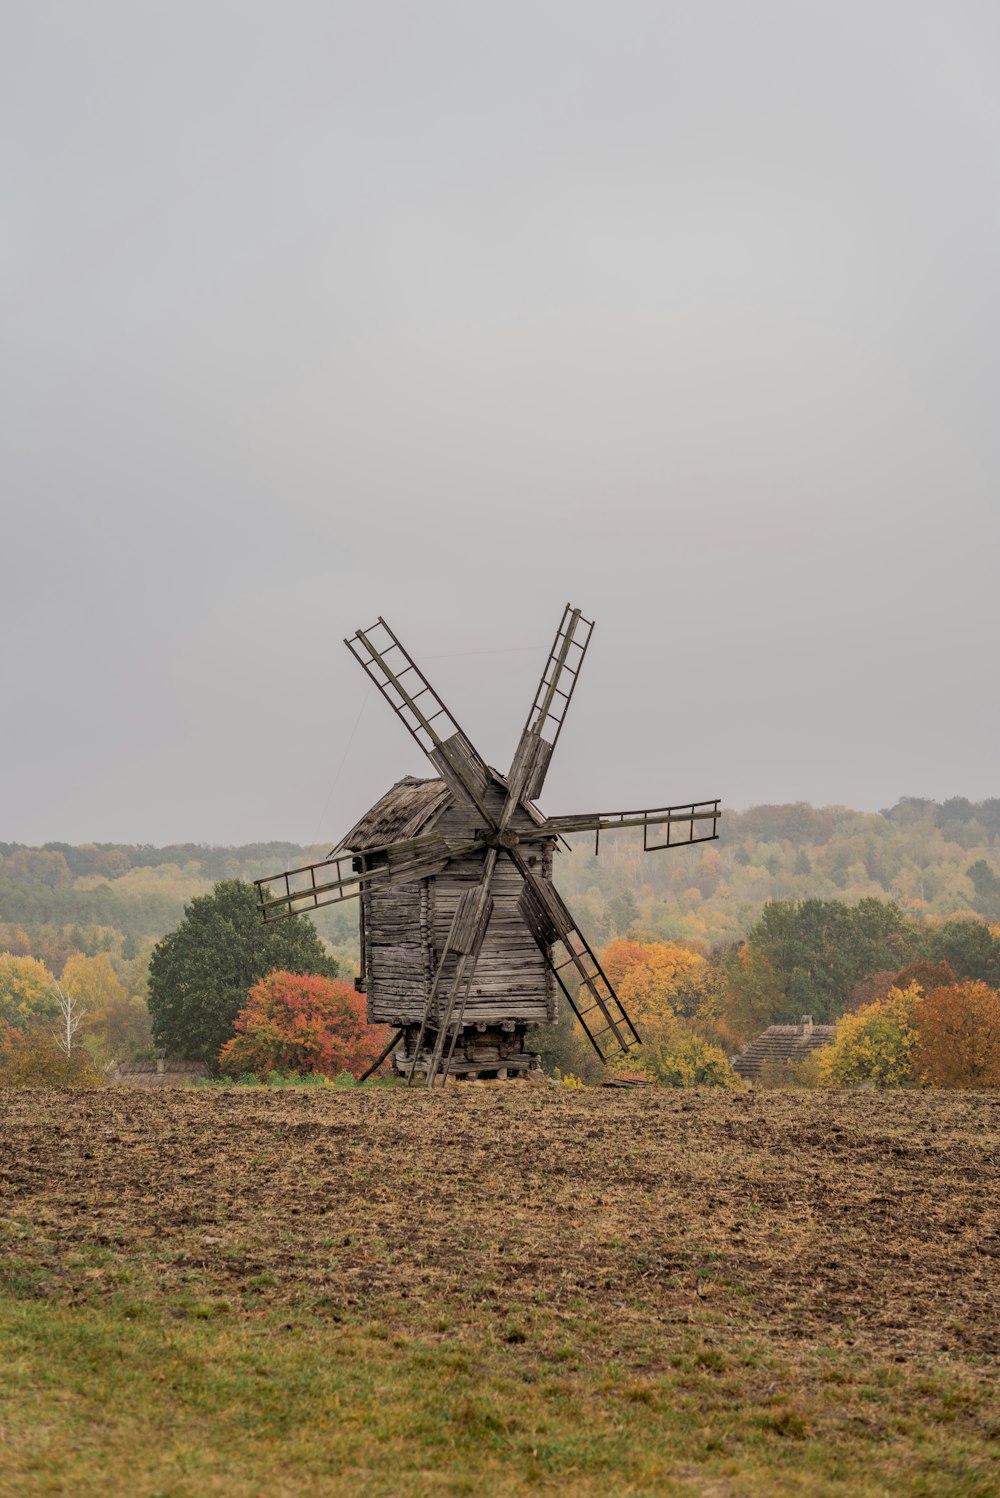 a windmill in a field with trees in the background